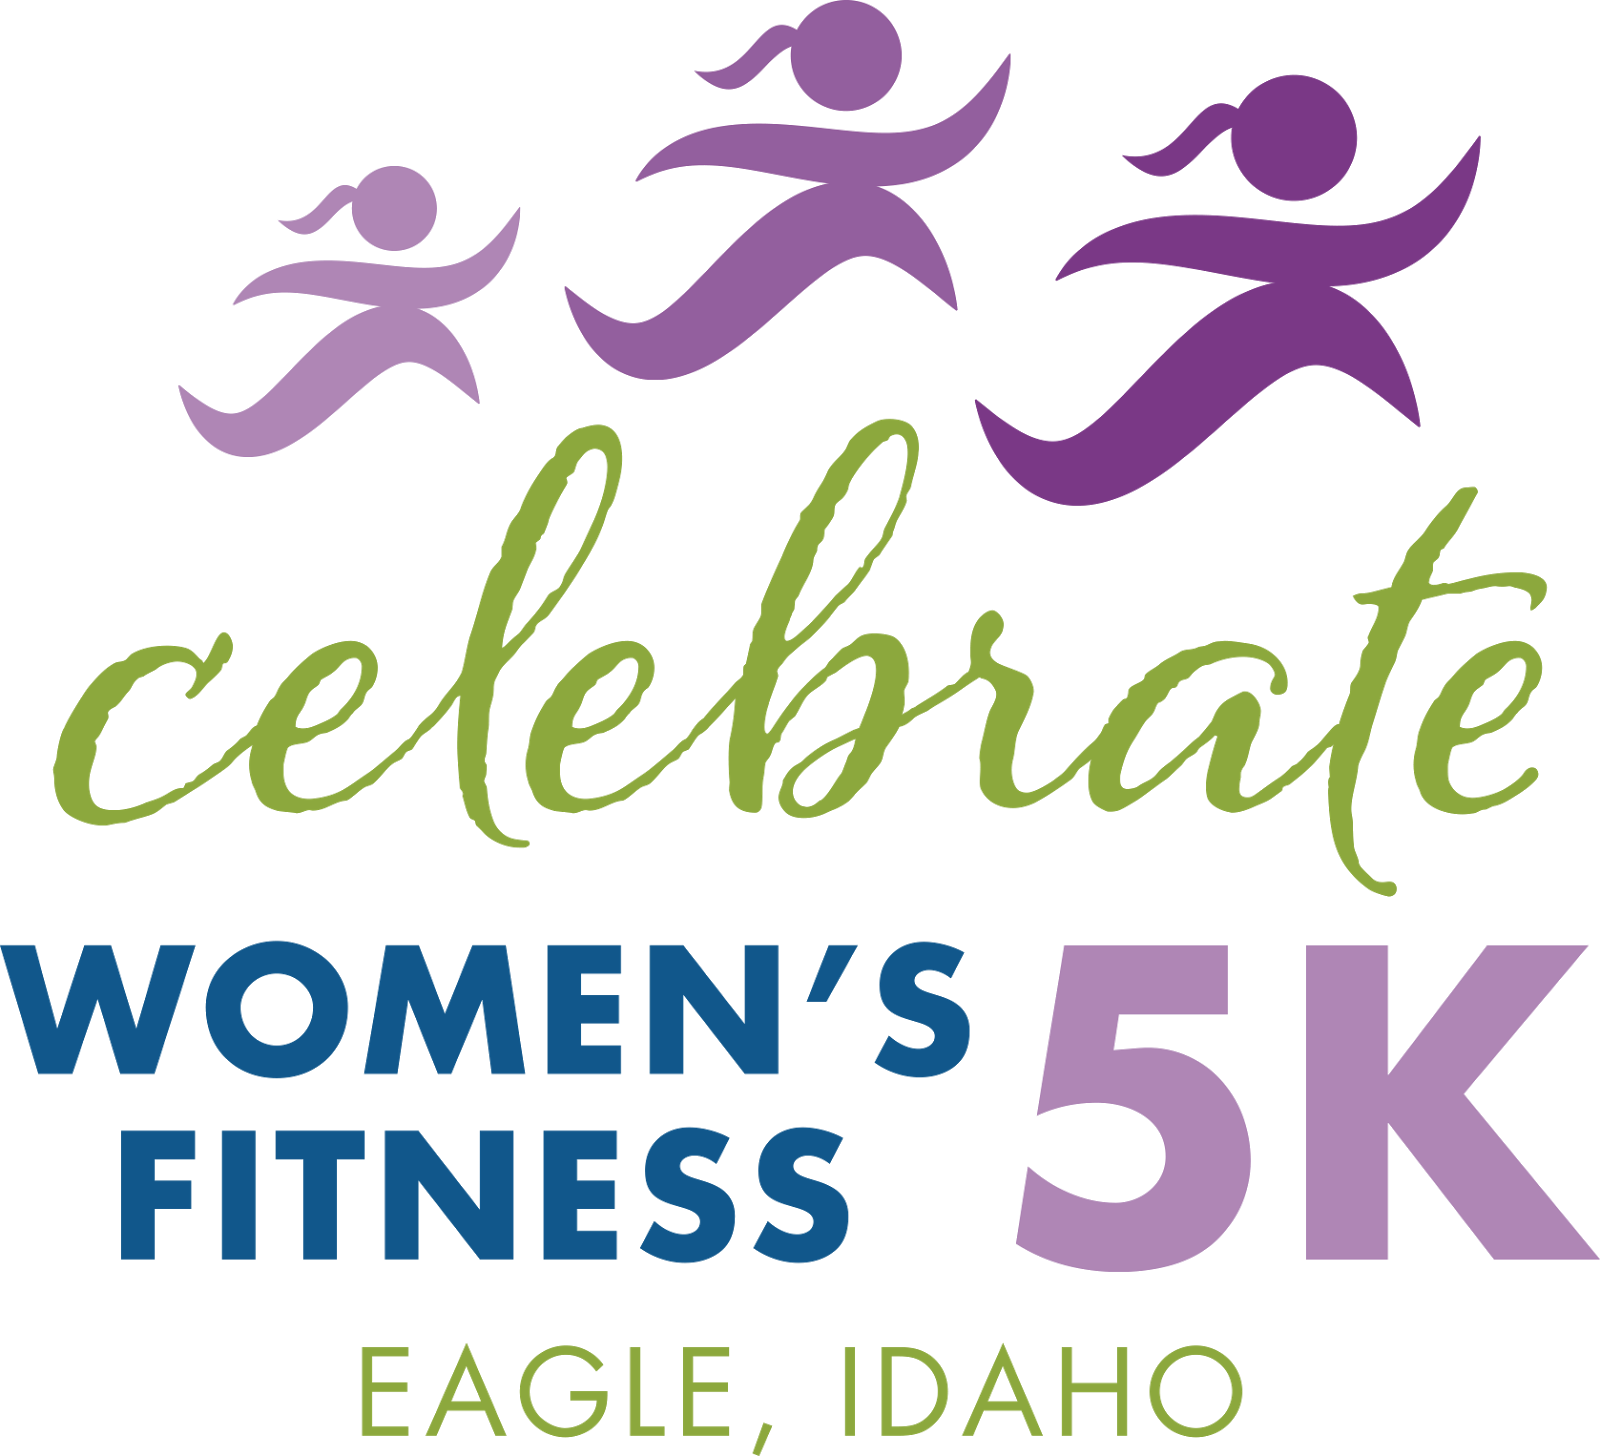 I'll Be at Celebrate Women's Fitness, Will You?